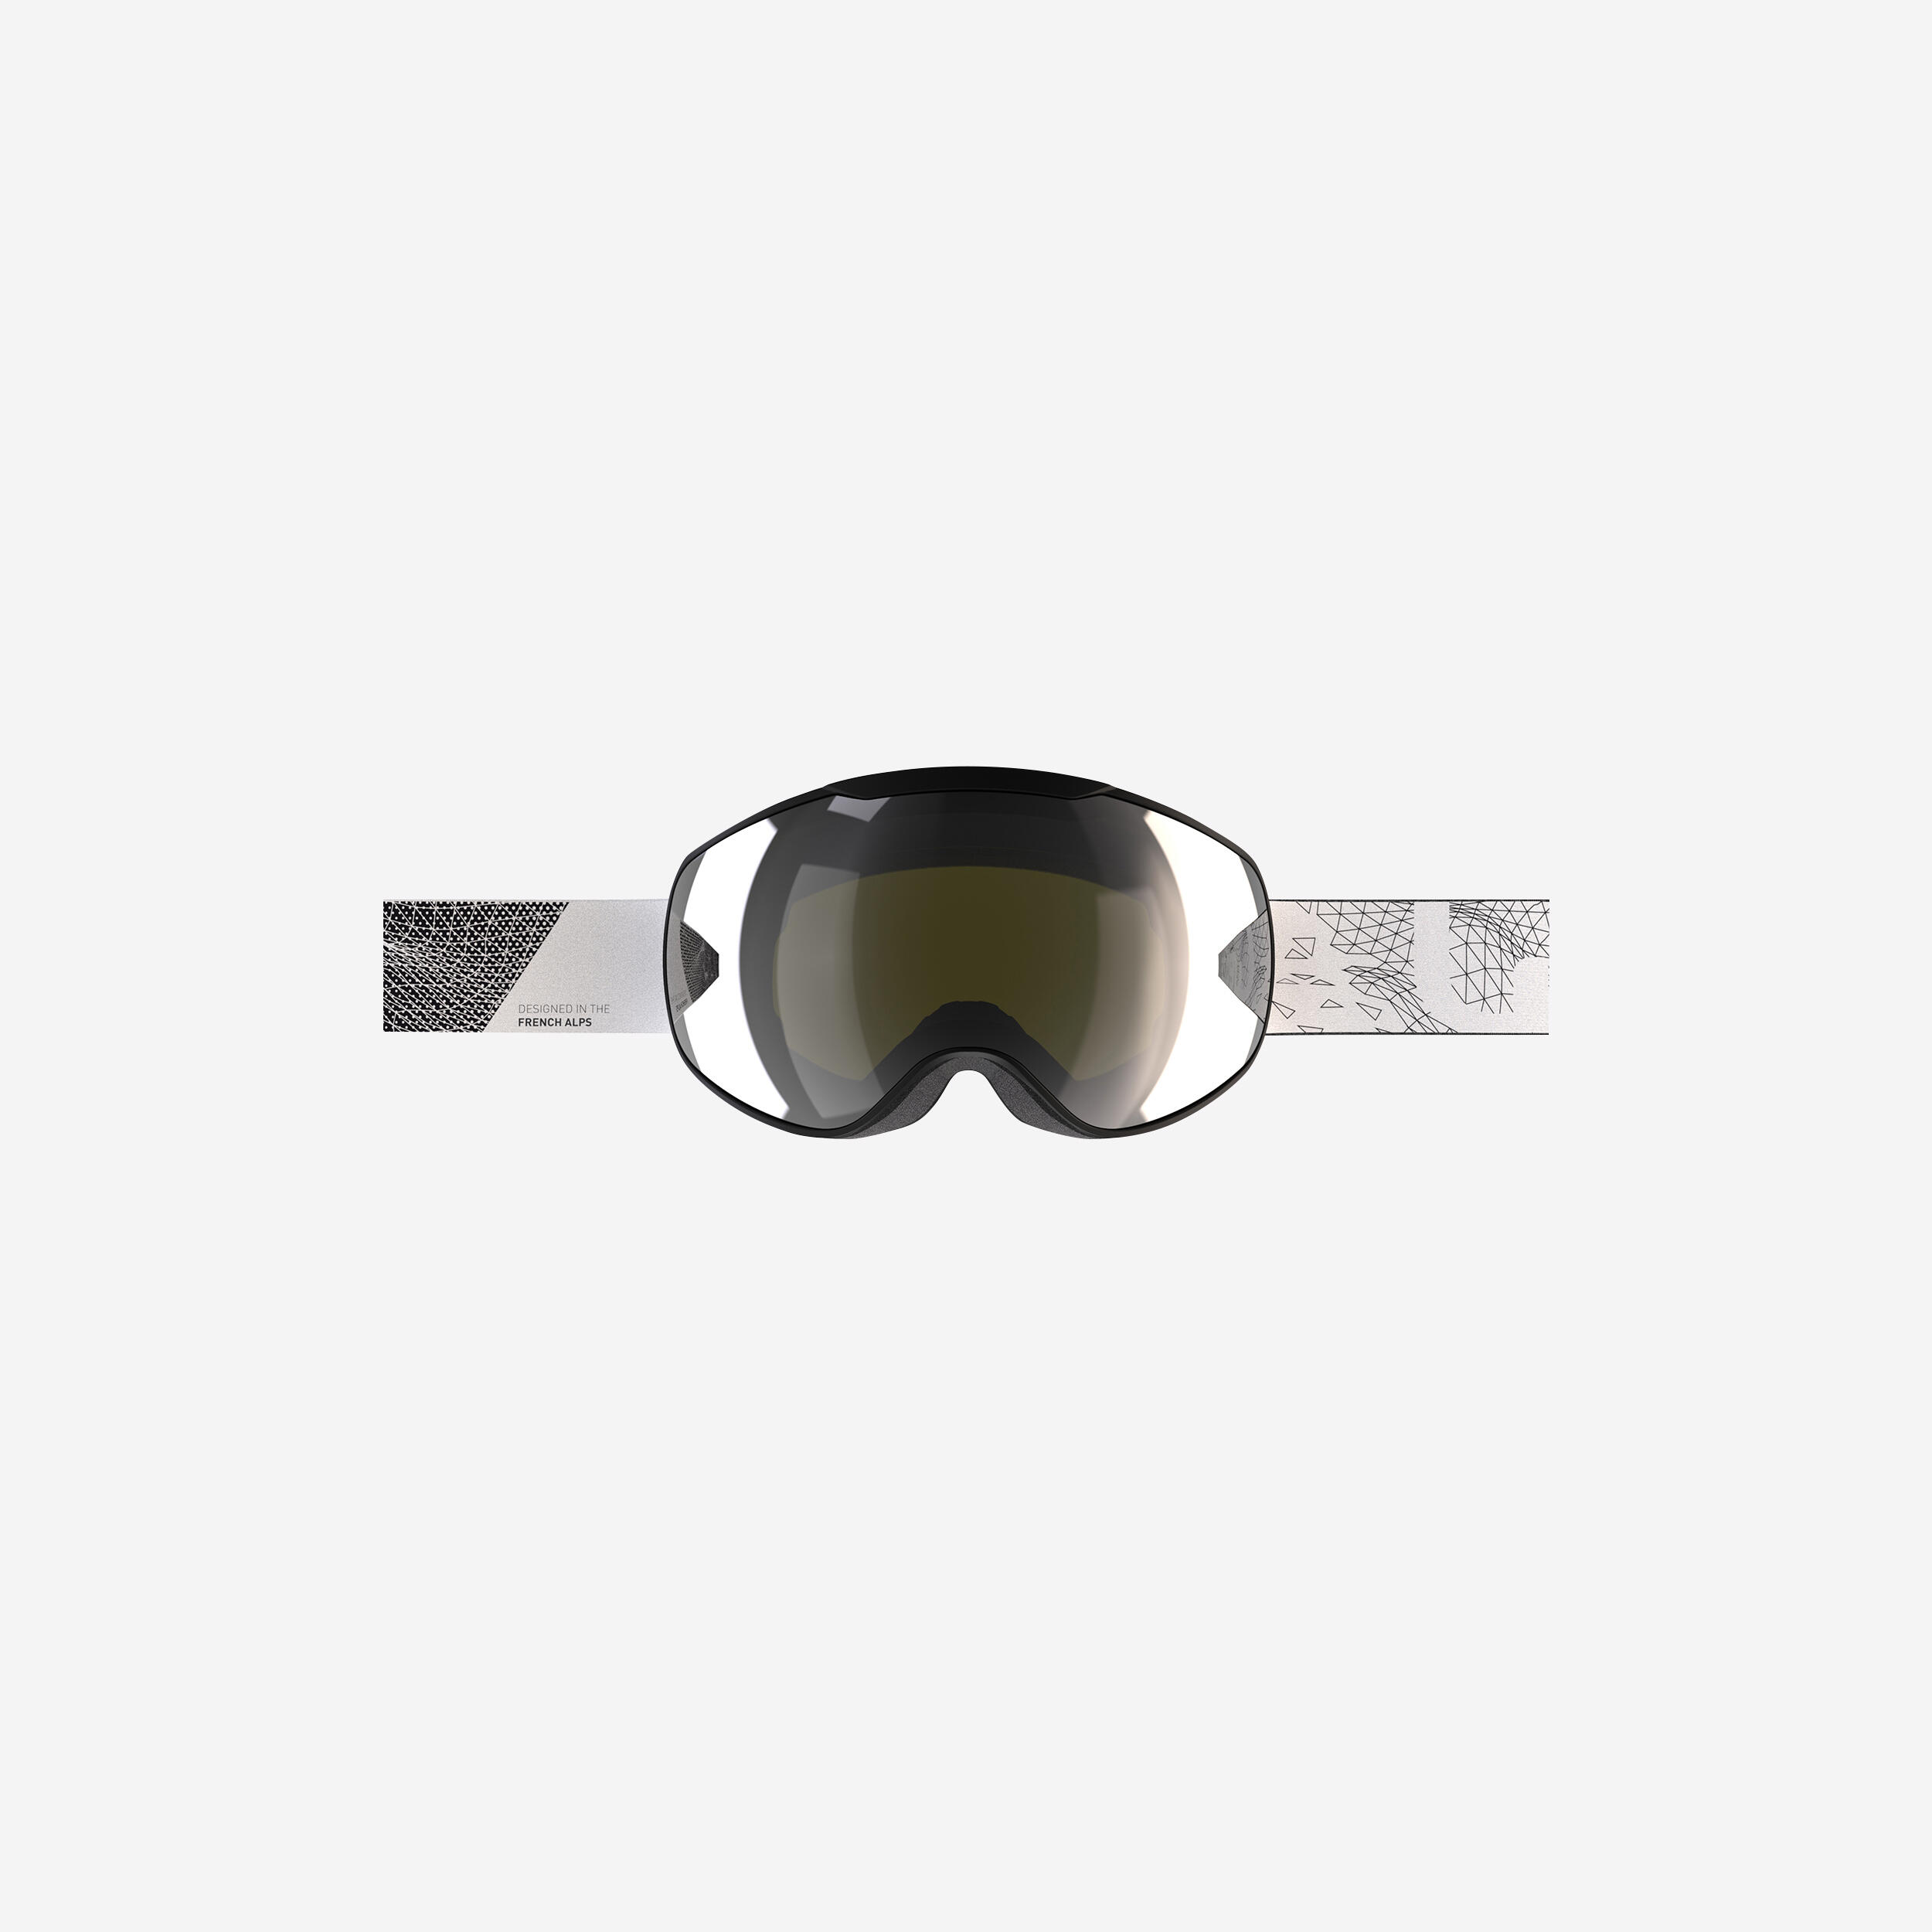 WEDZE KIDS’ AND ADULT SKIING AND SNOWBOARDING GOGGLES GOOD WEATHER - G 900 S3 - BLACK